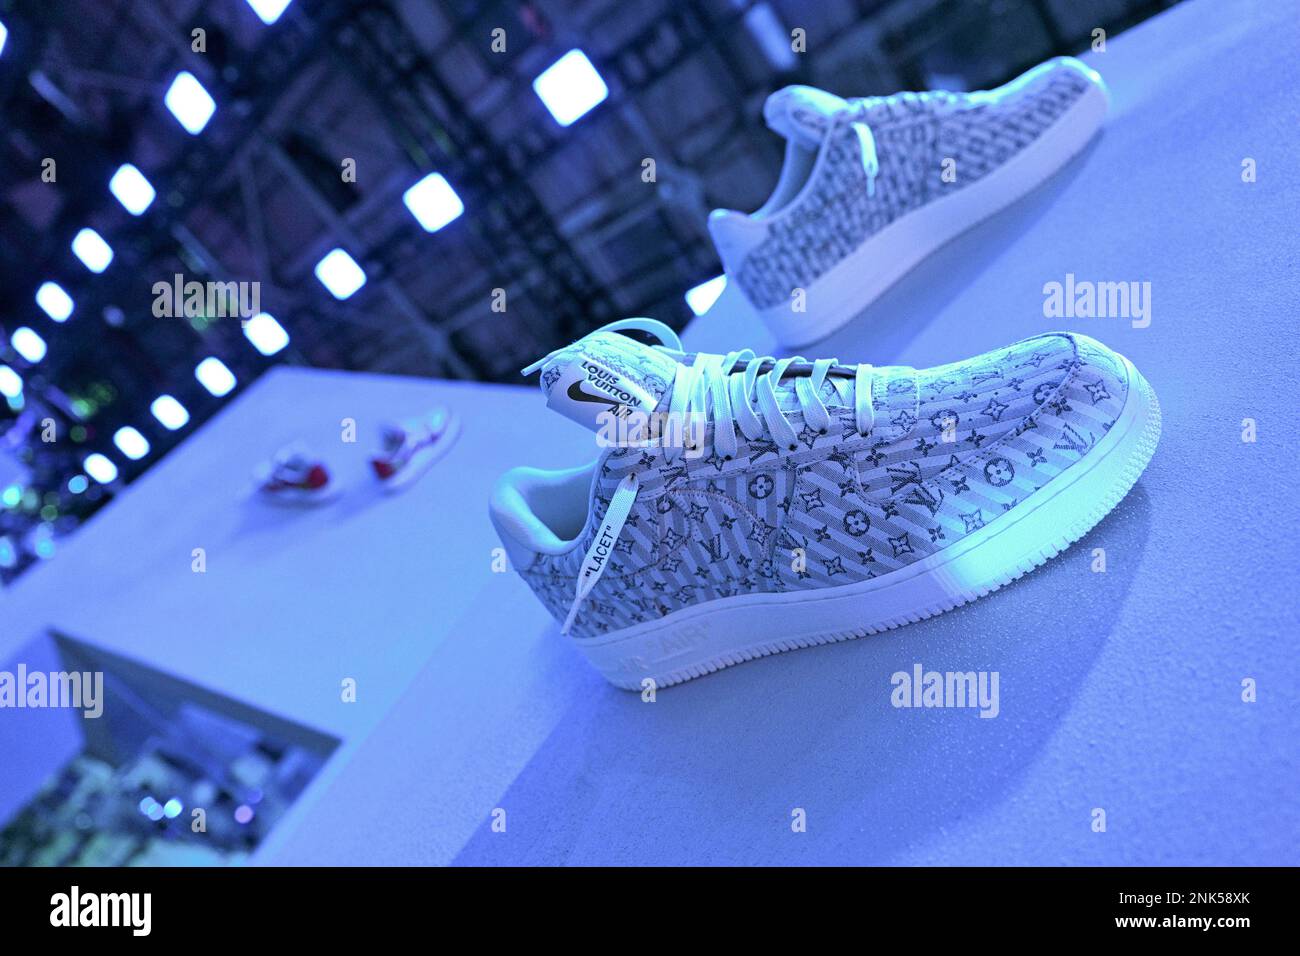 Photo by: NDZ/STAR MAX/IPx 2022 5/21/22 Louis Vuitton's Nike Air Force 1  collaboration on display at the Greenpoint Terminal Warehouse in Brooklyn  on May 21, 2022 in New York Stock Photo - Alamy